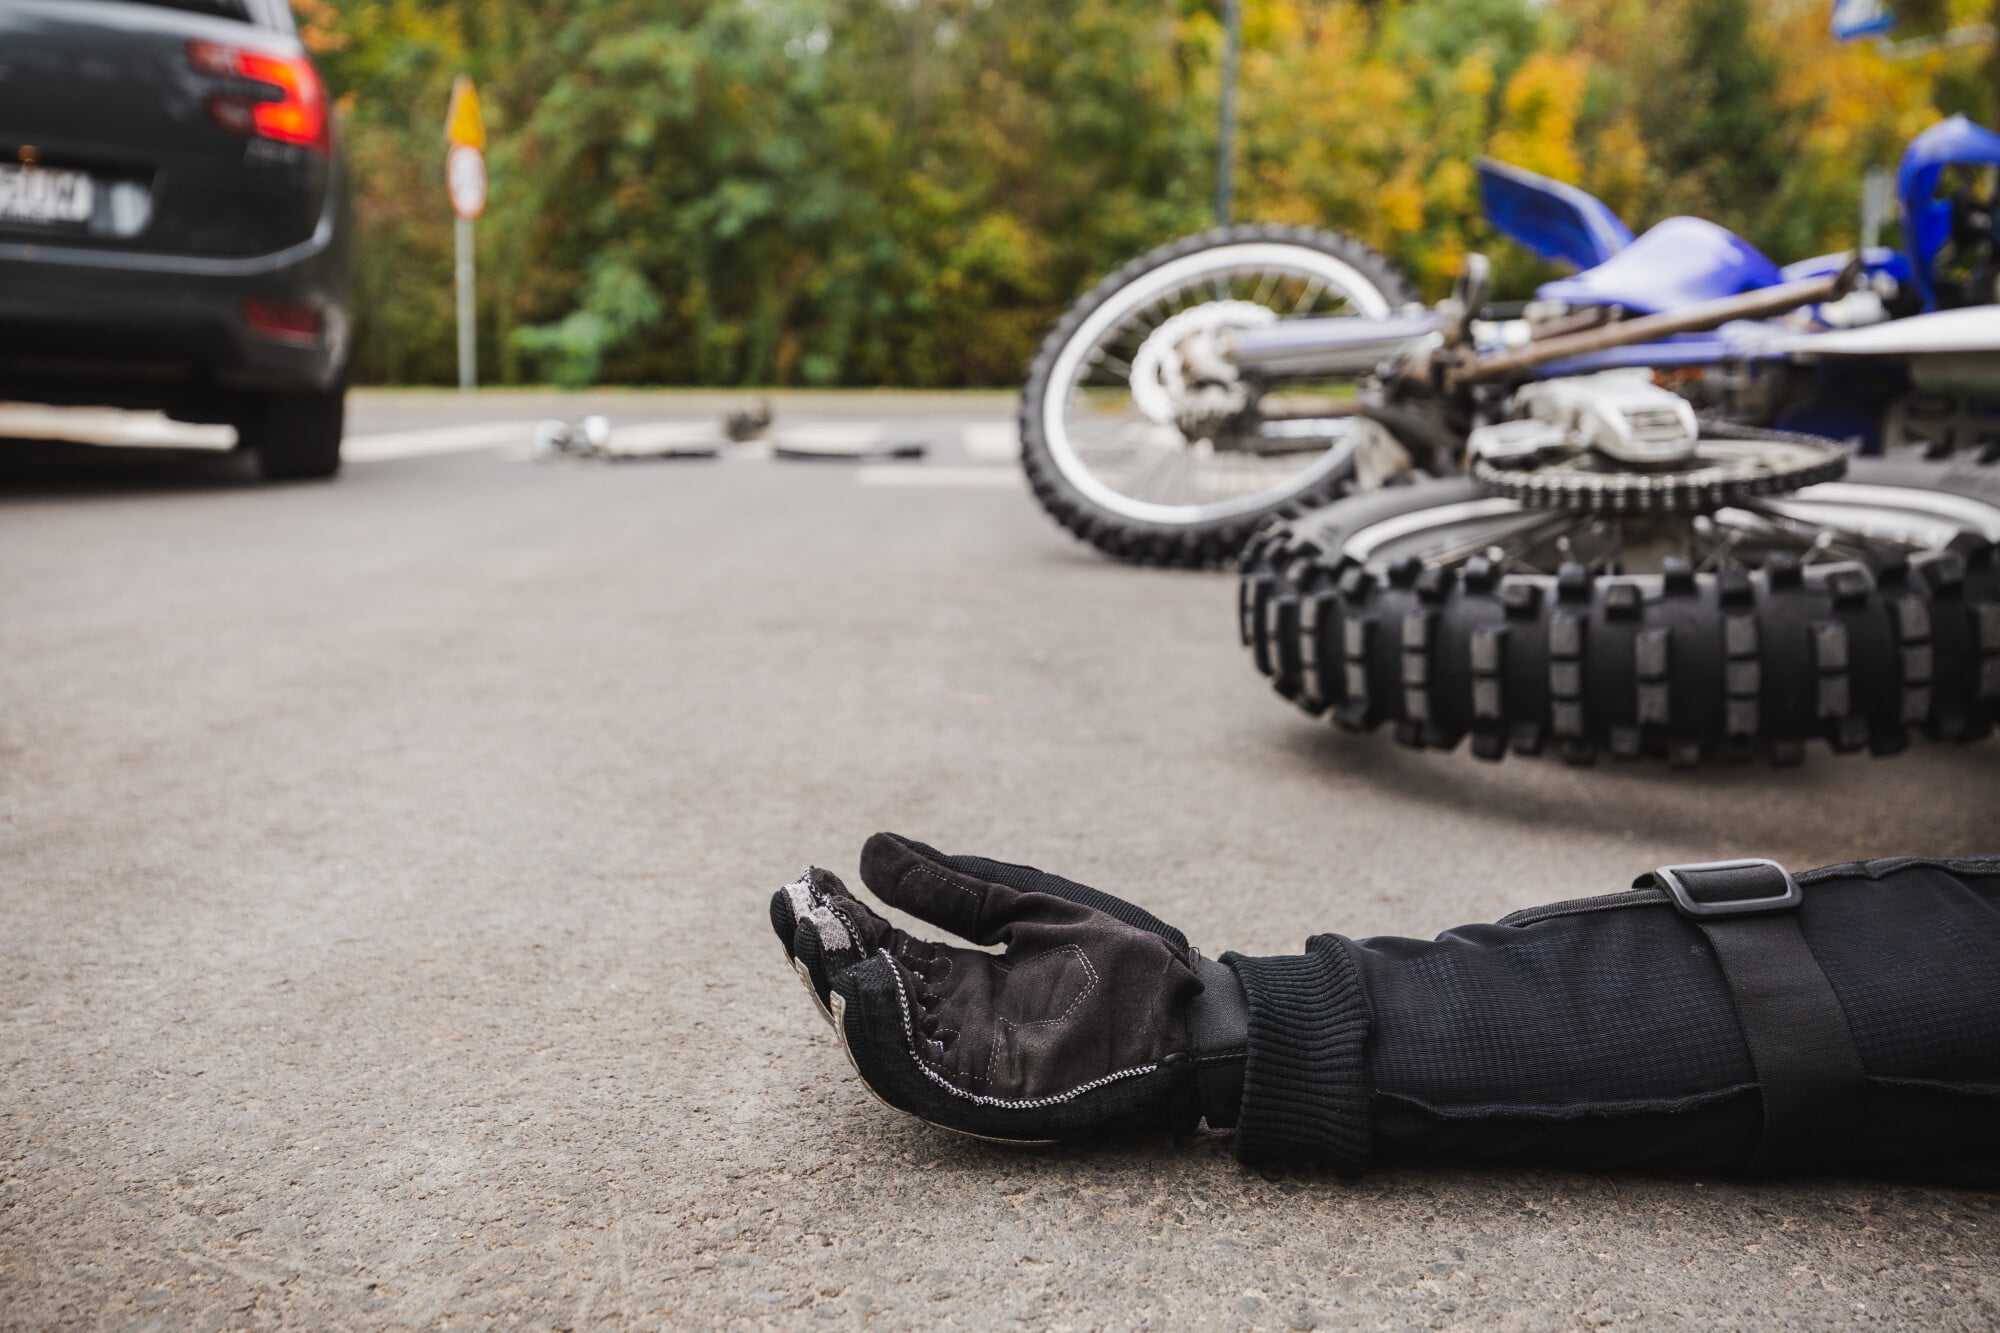 5 Reasons to Hire an Attorney After a Motorcycle Accident